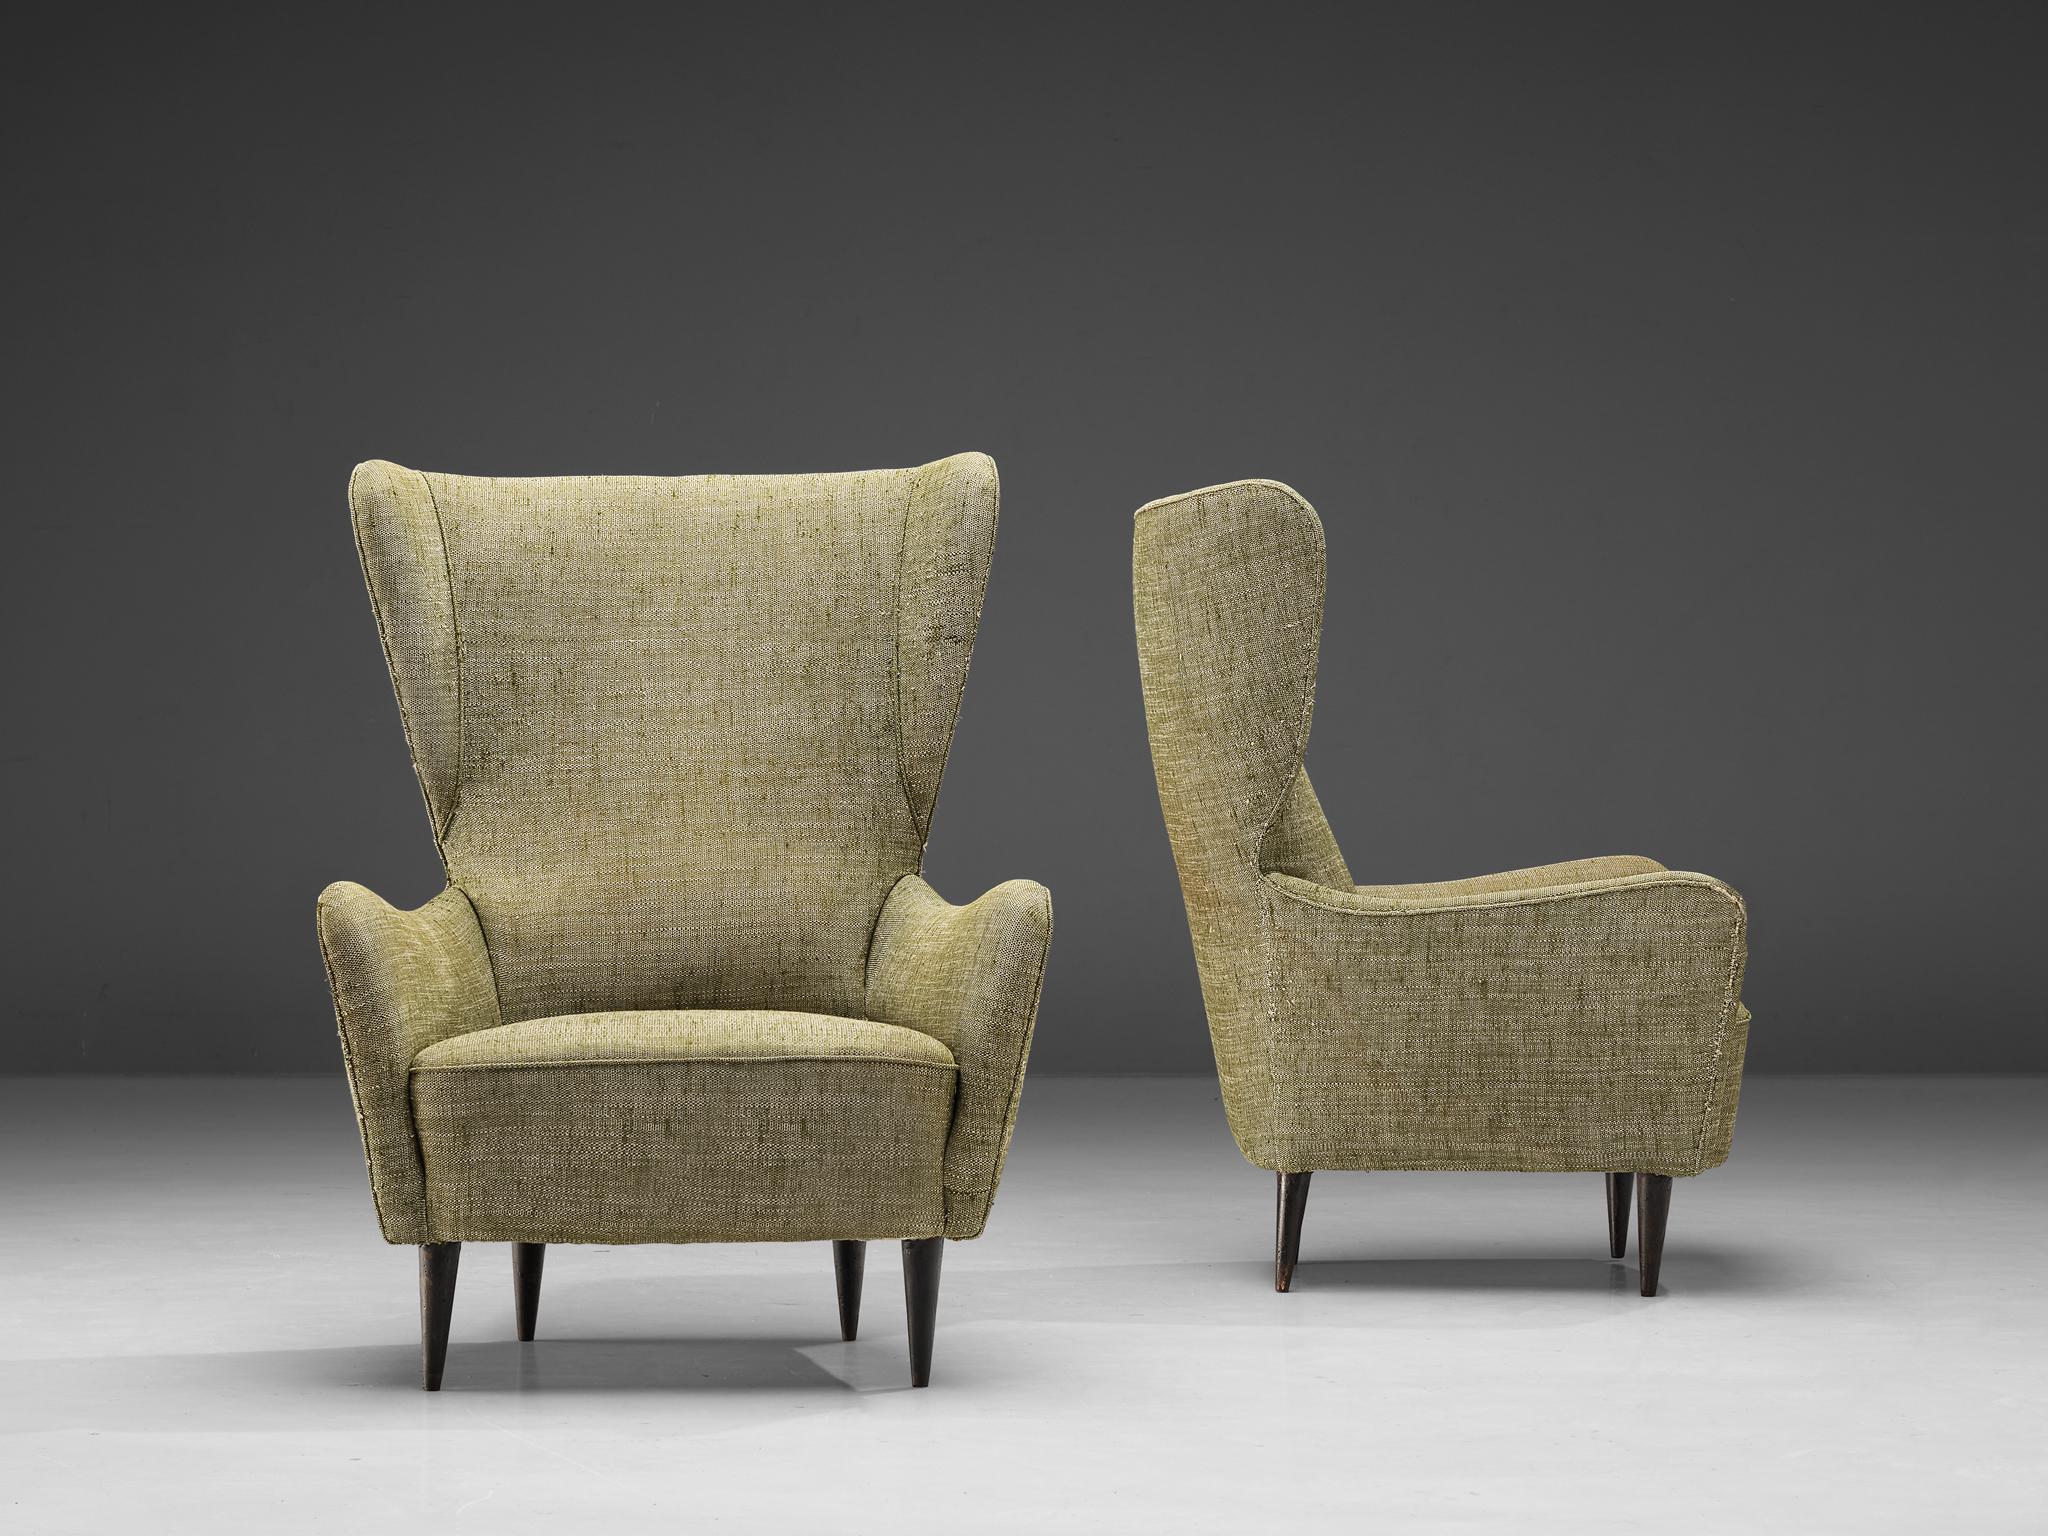 Mid-20th Century Italian Pair of Wingback Chairs in Olive Green Upholstery